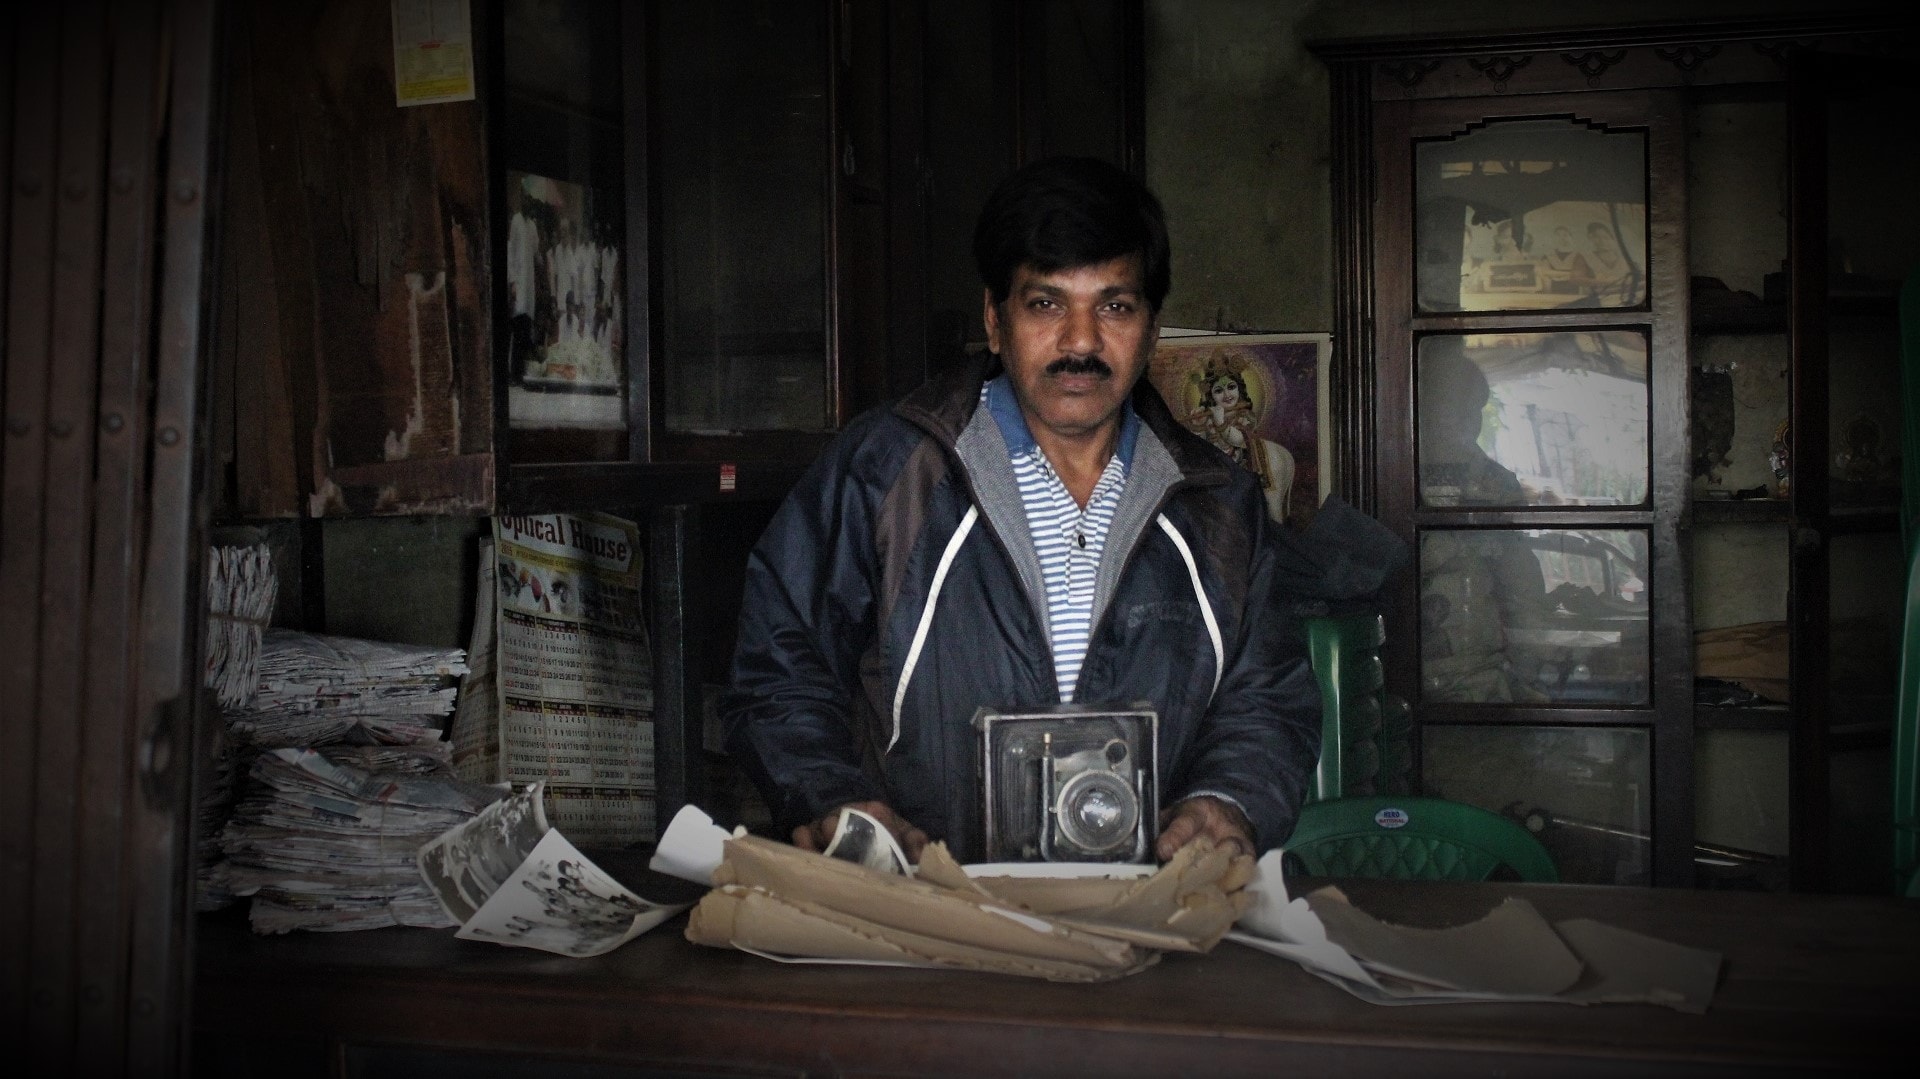 In one of Kolkata's largest crematoriums, photographing the dead was once a popular business